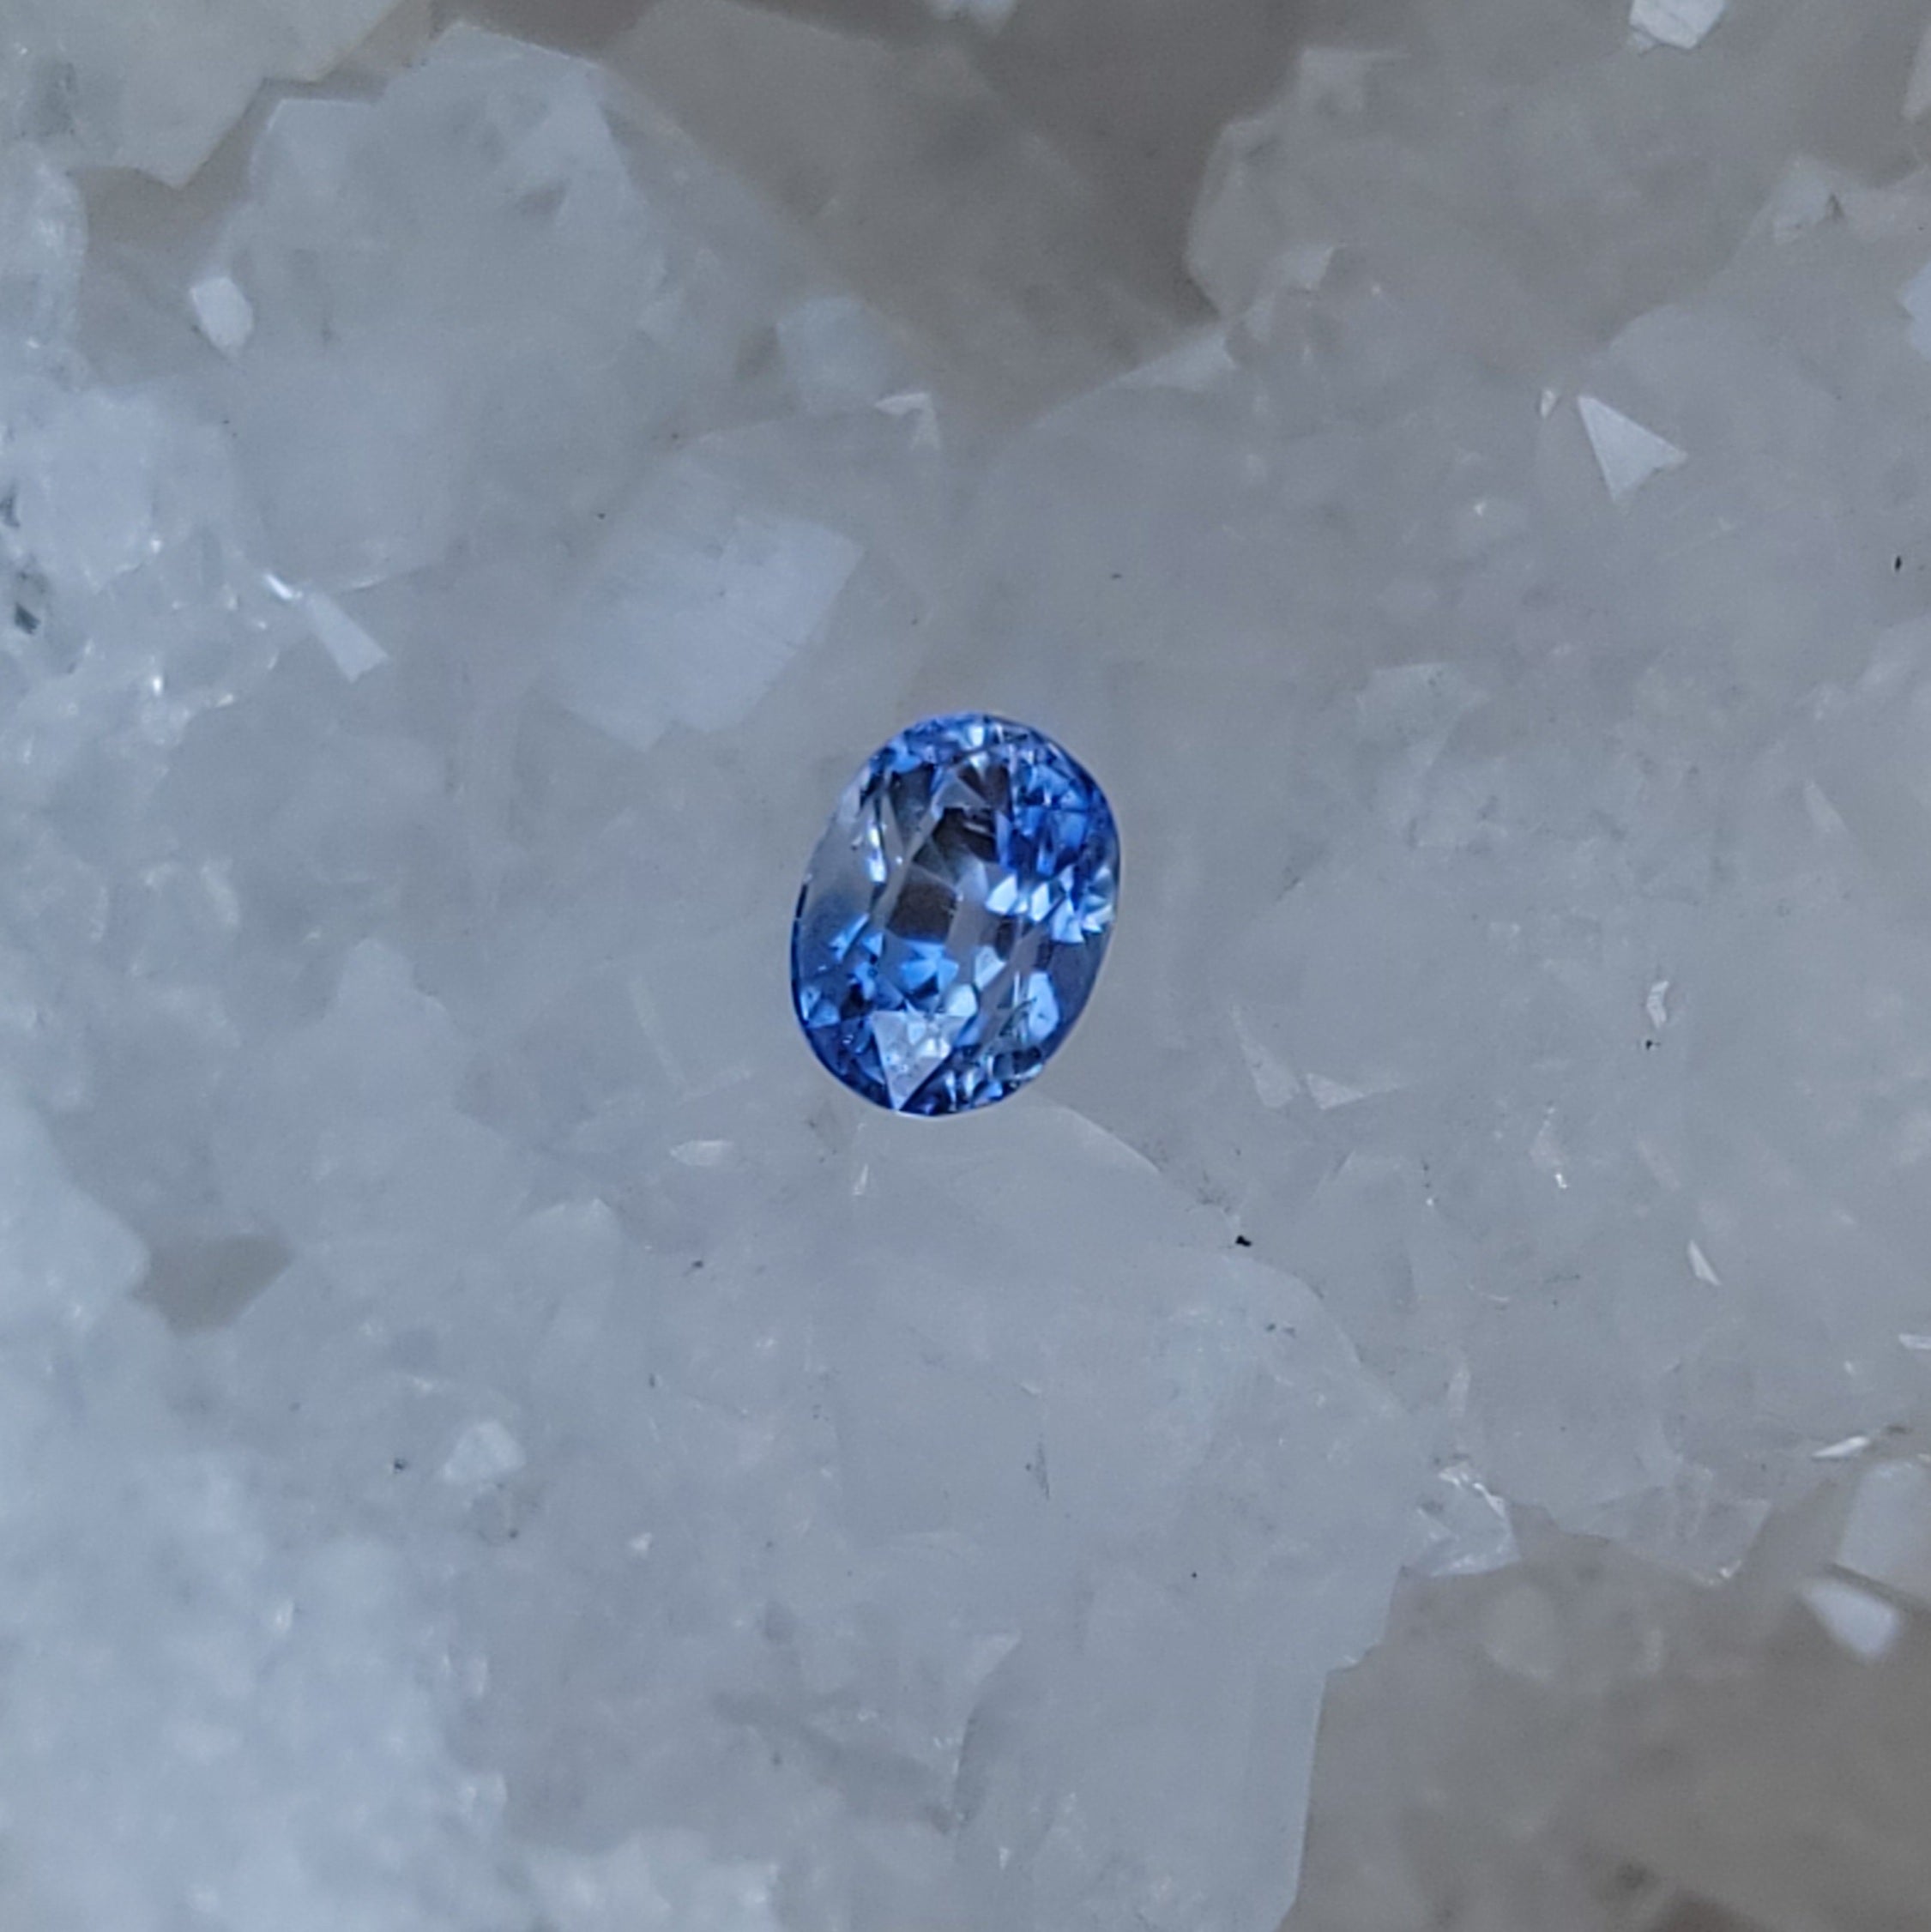 Sri Lankan Sapphire 1.96 CT Violet, Periwinkle, Gray, Silver, White, Clear Oval Cut